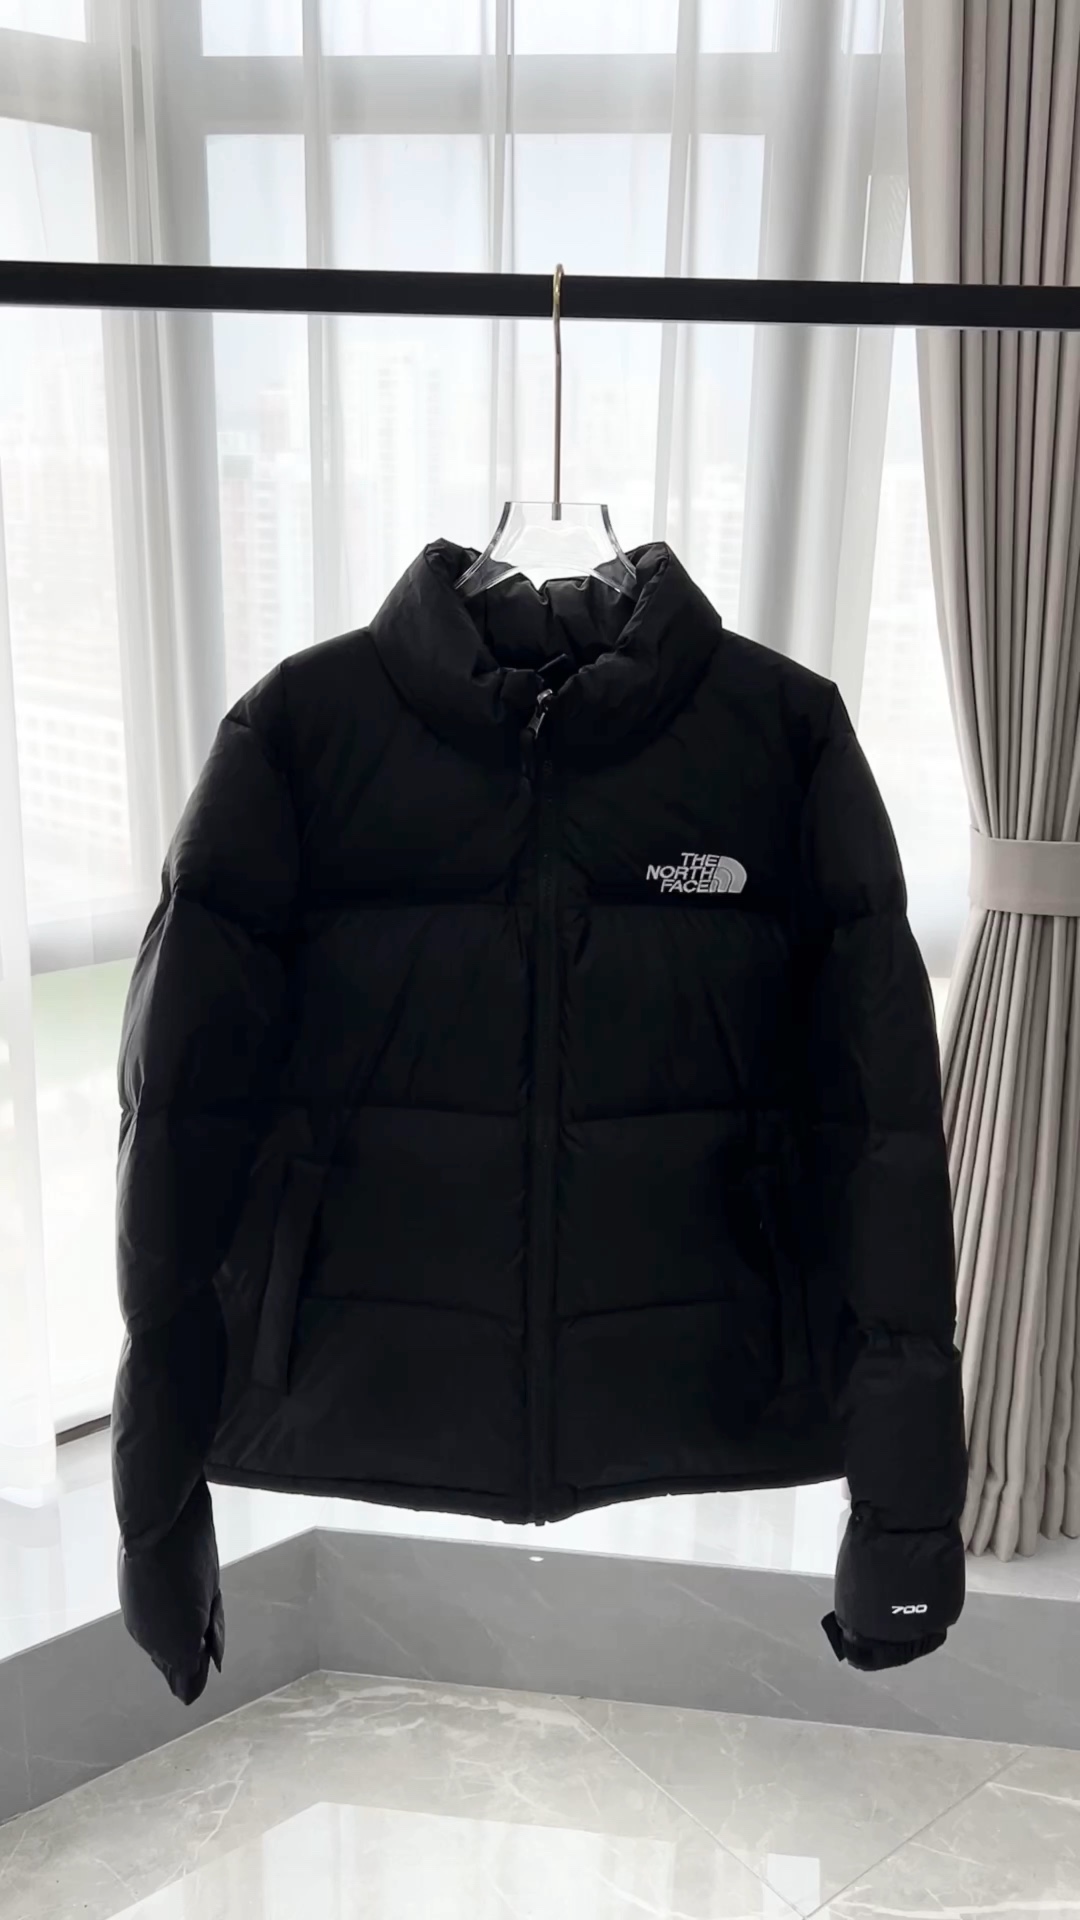 The North Face Clothing Down Jacket Replica 1:1 Black